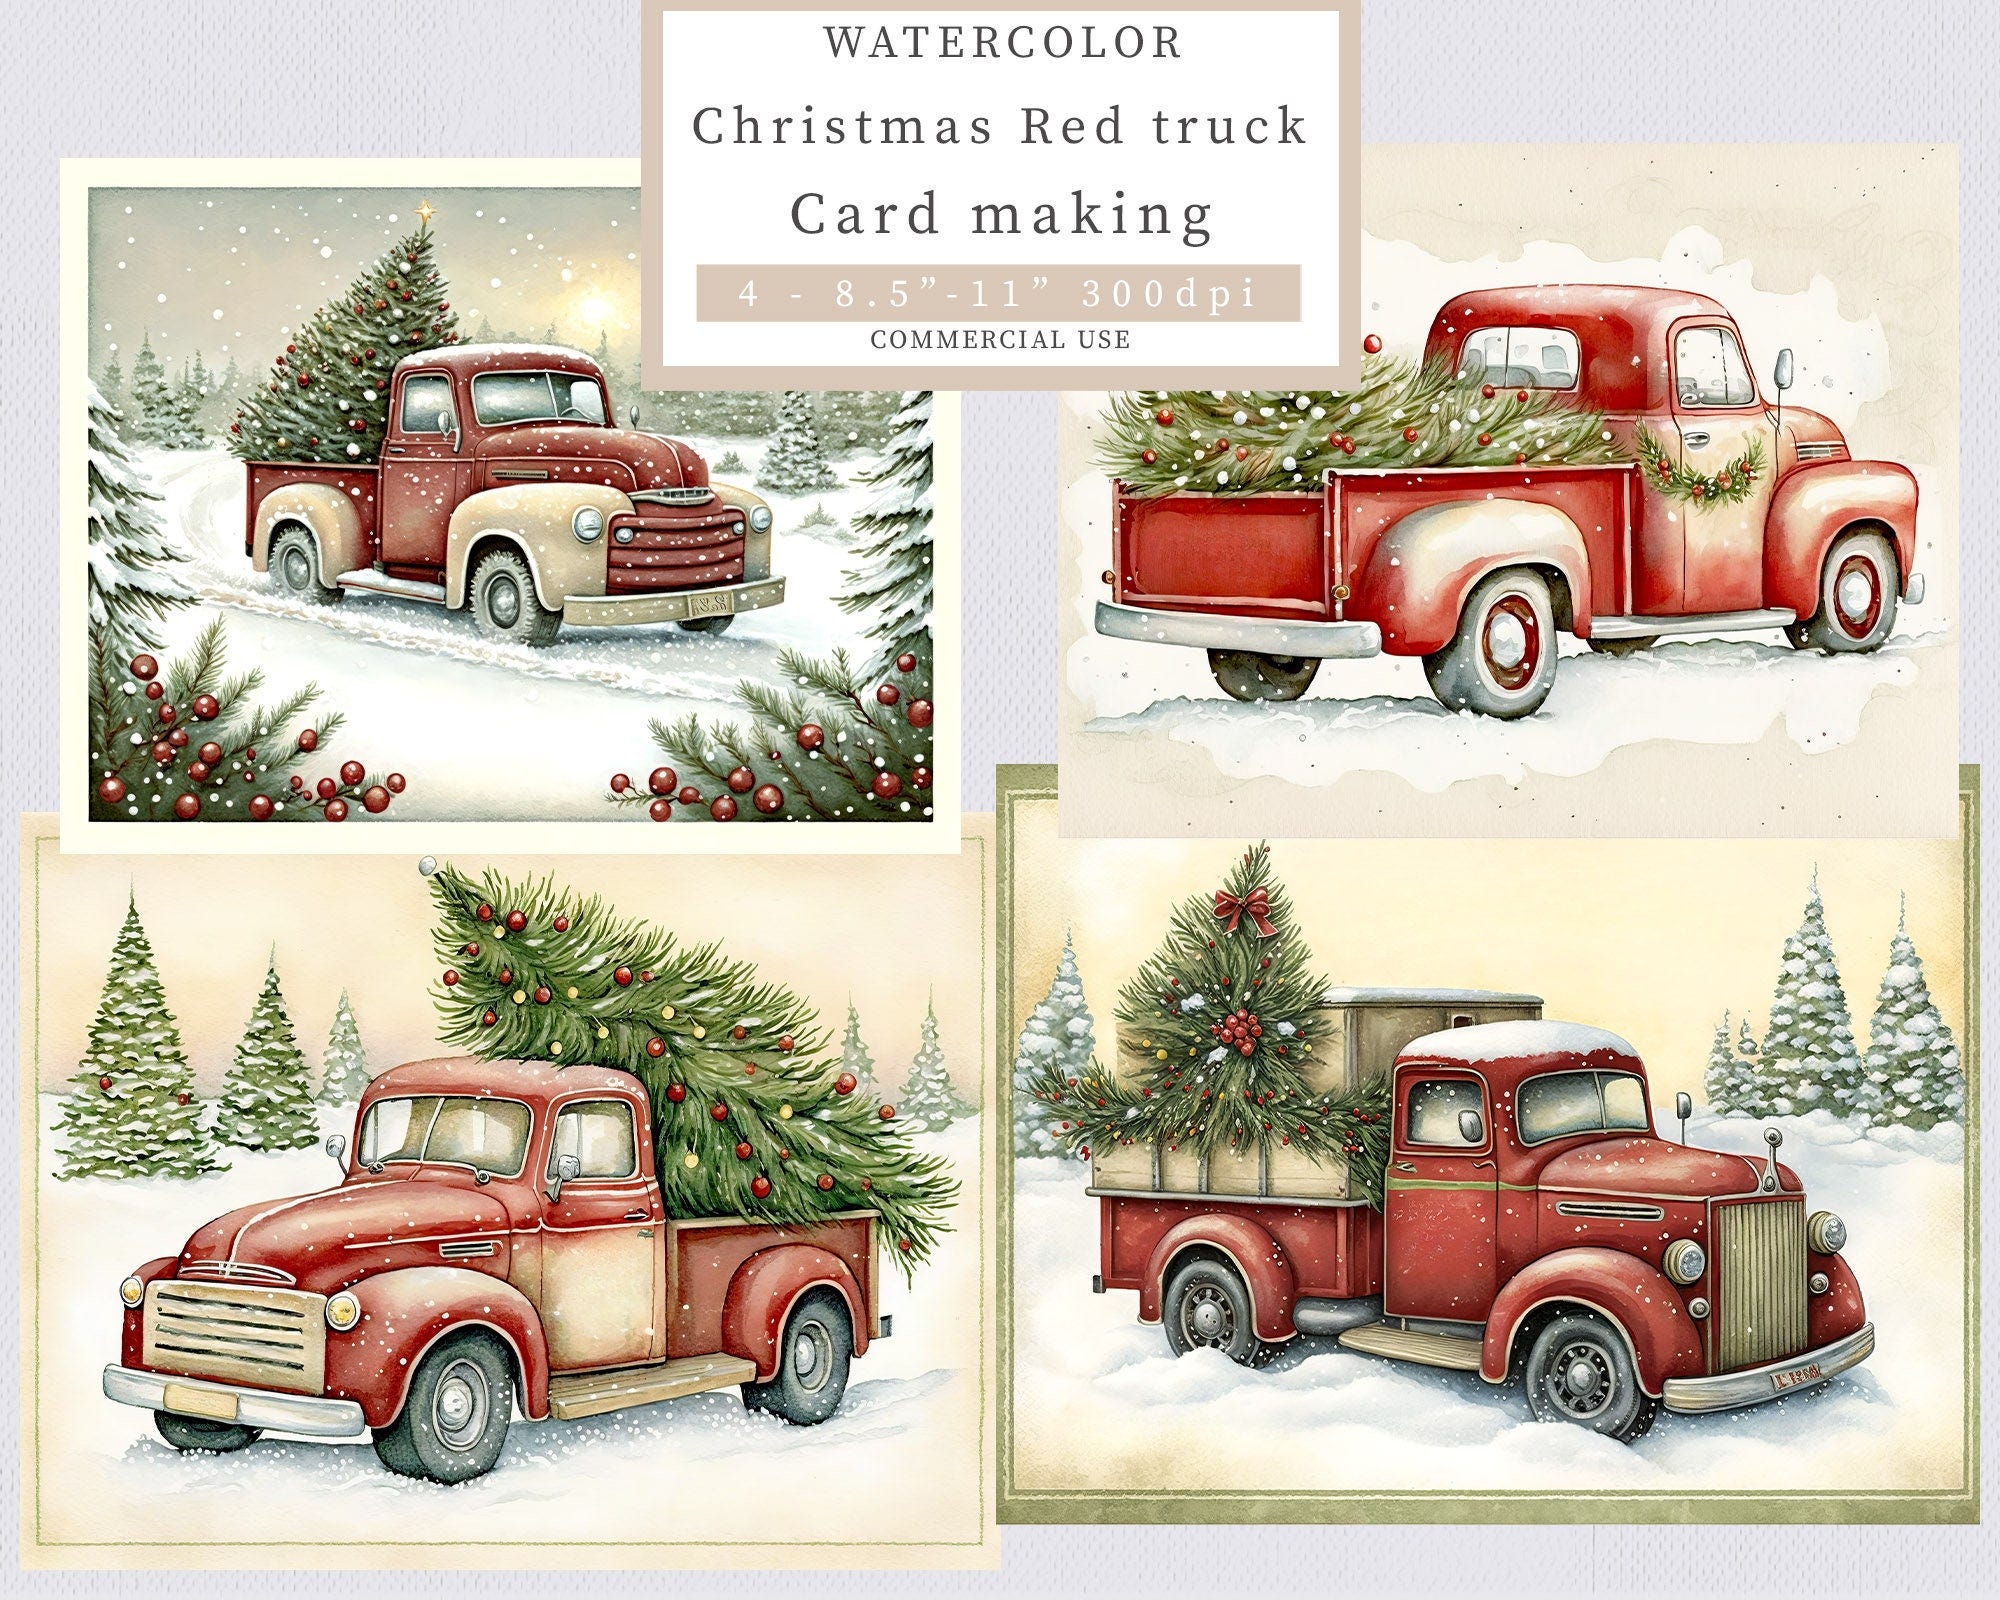 Red truck, JPG, Card making, Christmas, Winter, Holiday, Junk journal, Printables